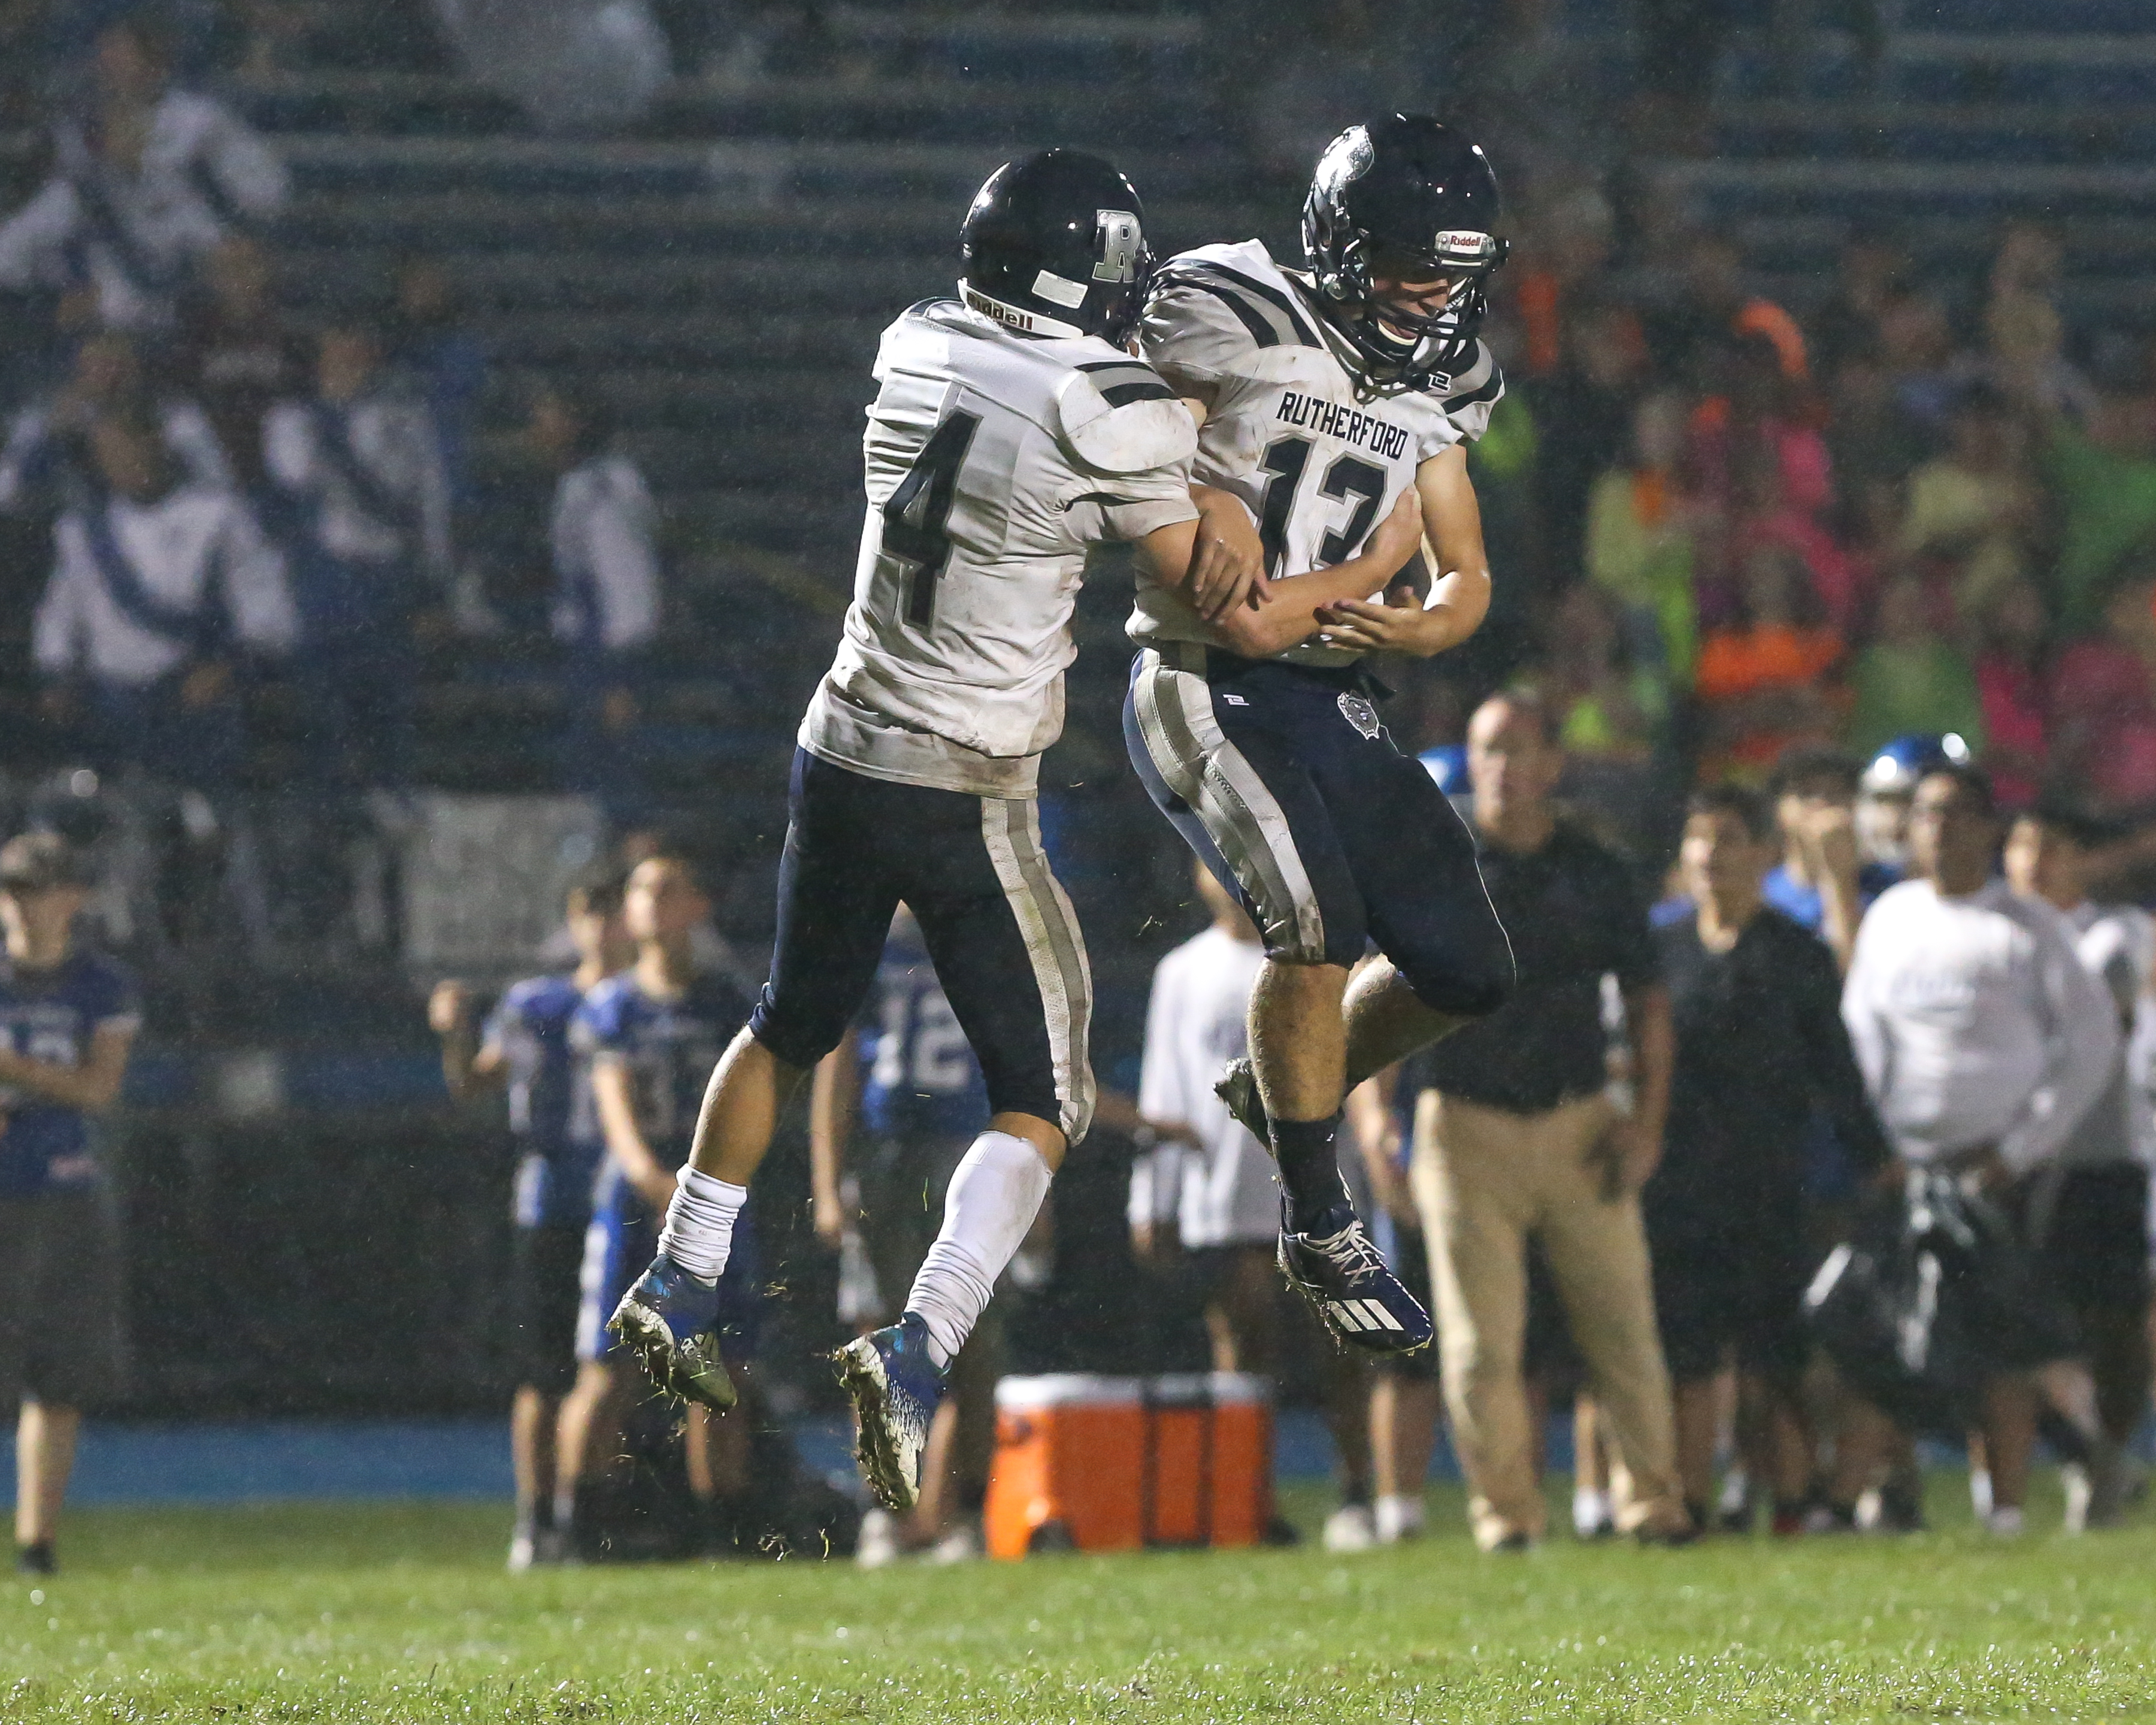 Football: Rutherford outlasts Hawthorne 27-21 in 2OT thriller